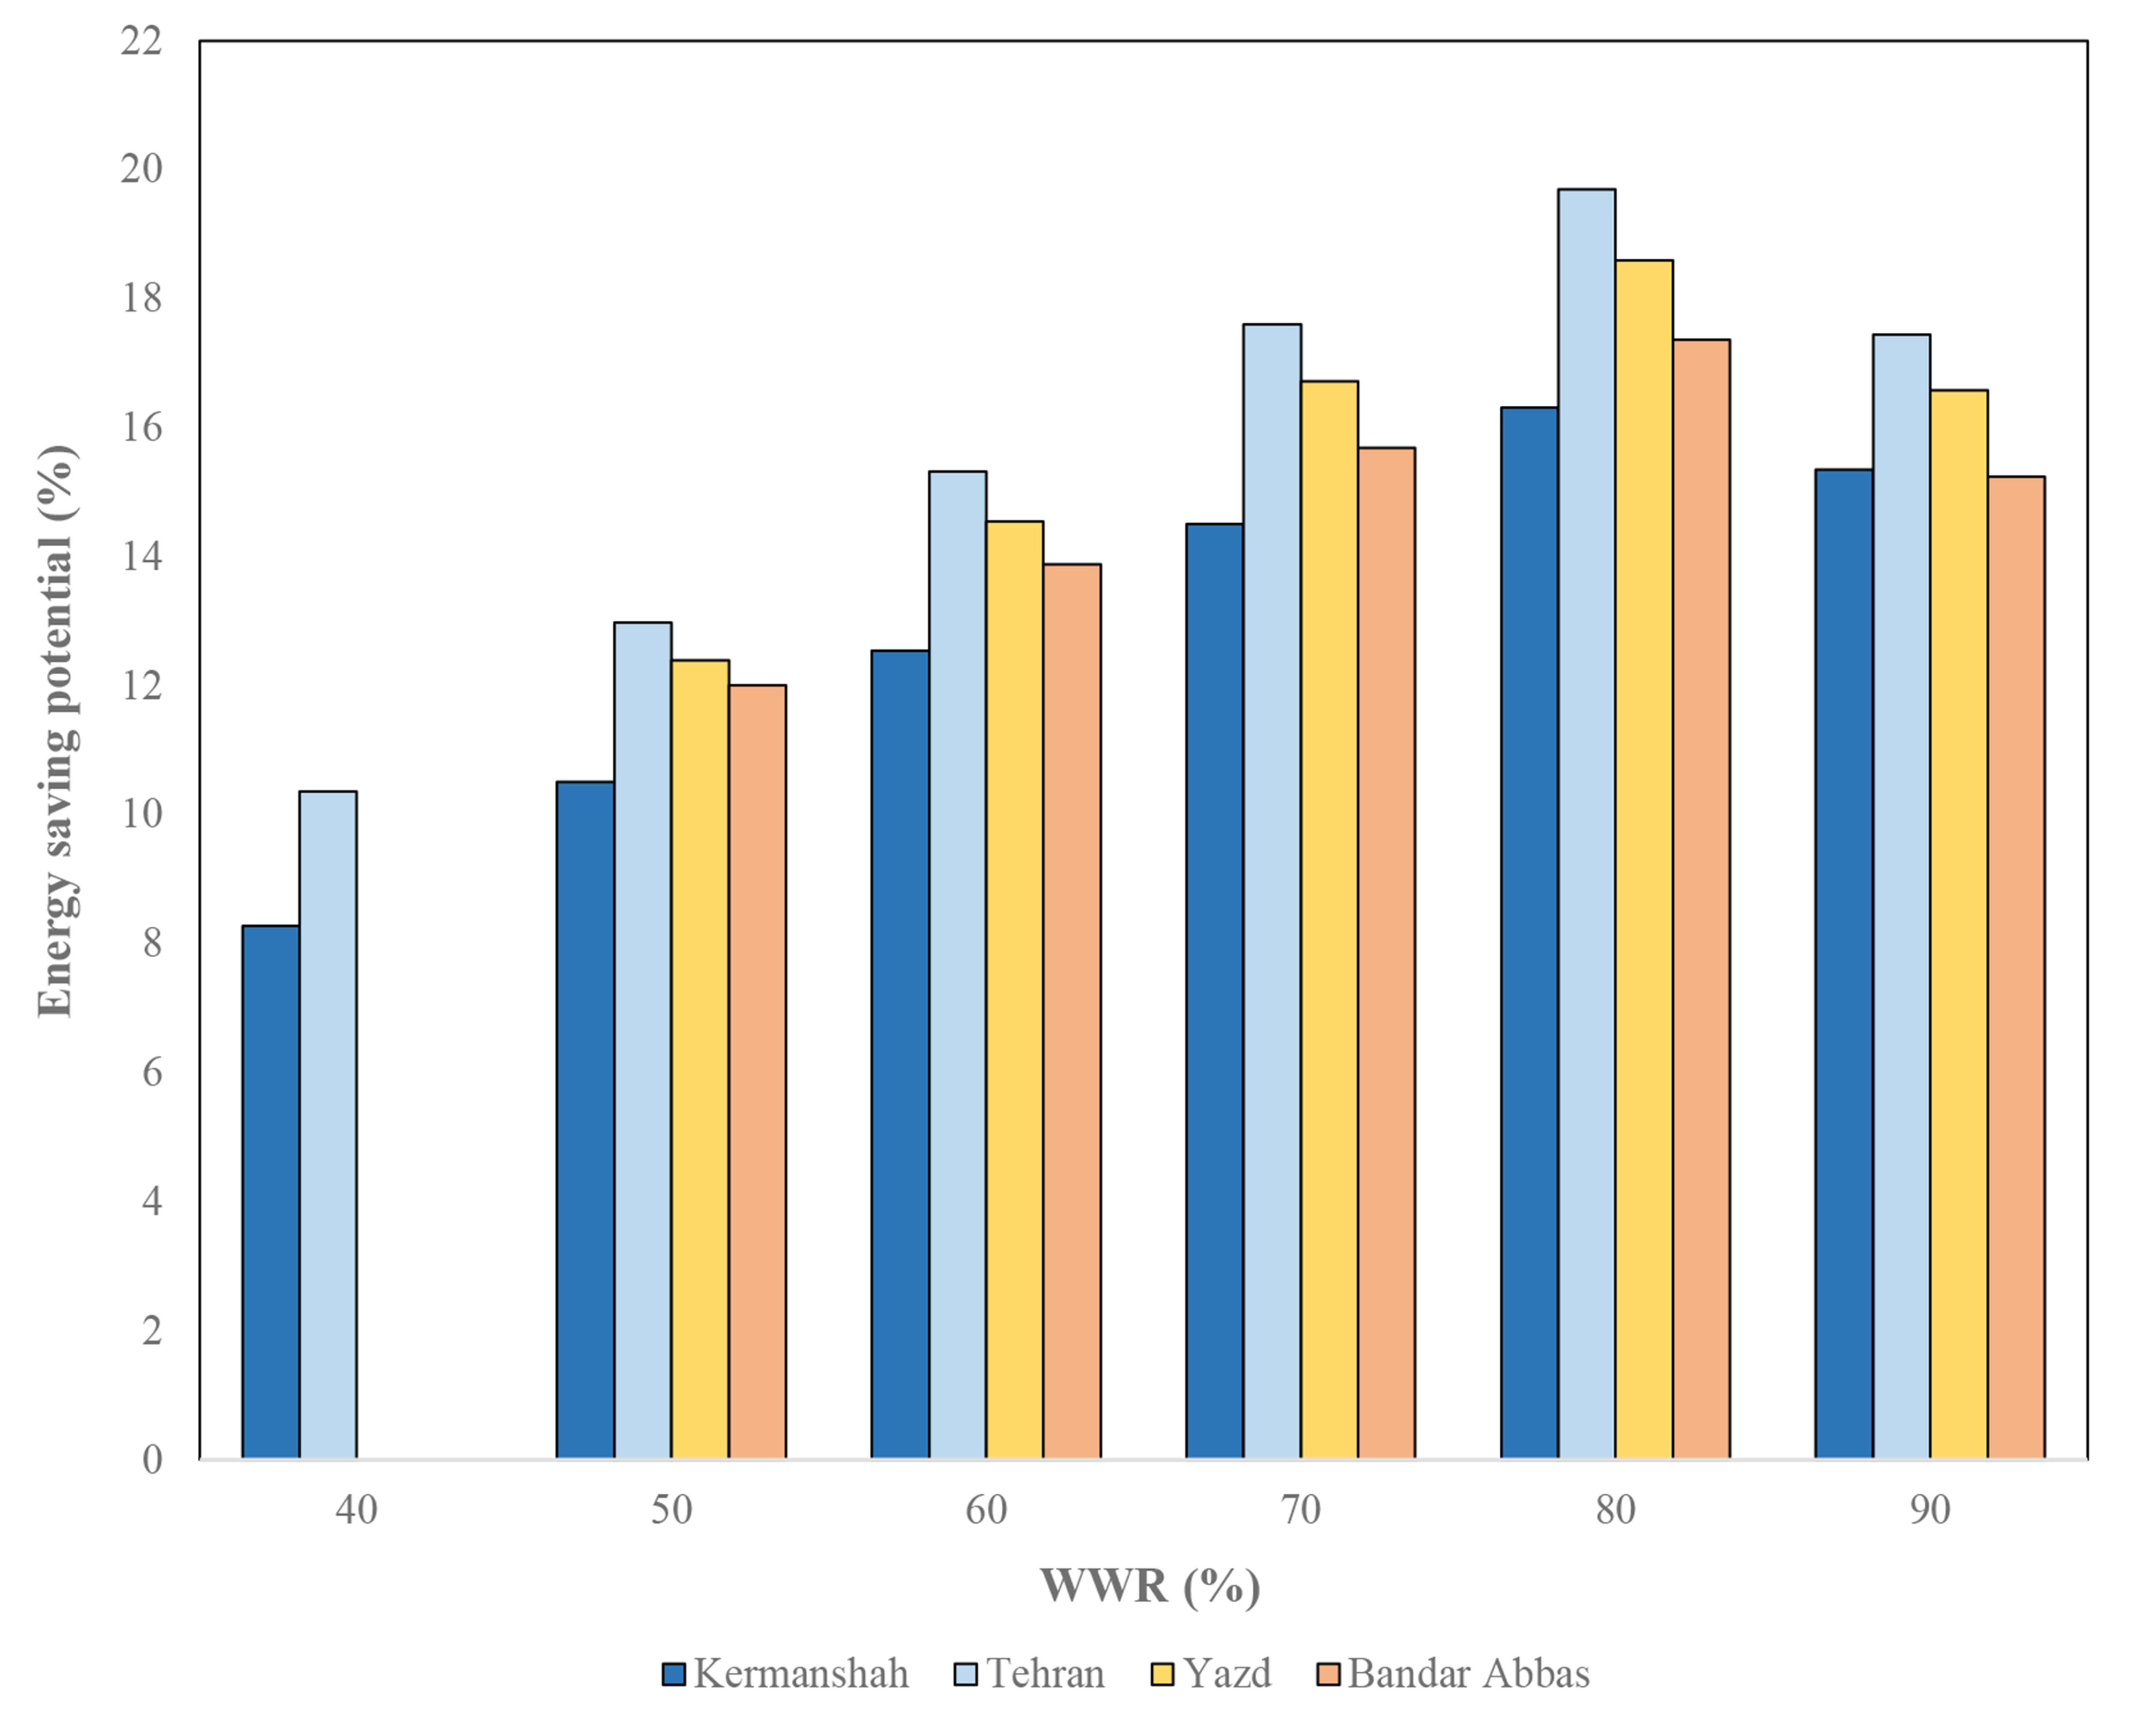 Energy saving potential of PVC windows using different WWR values in various climate conditions.